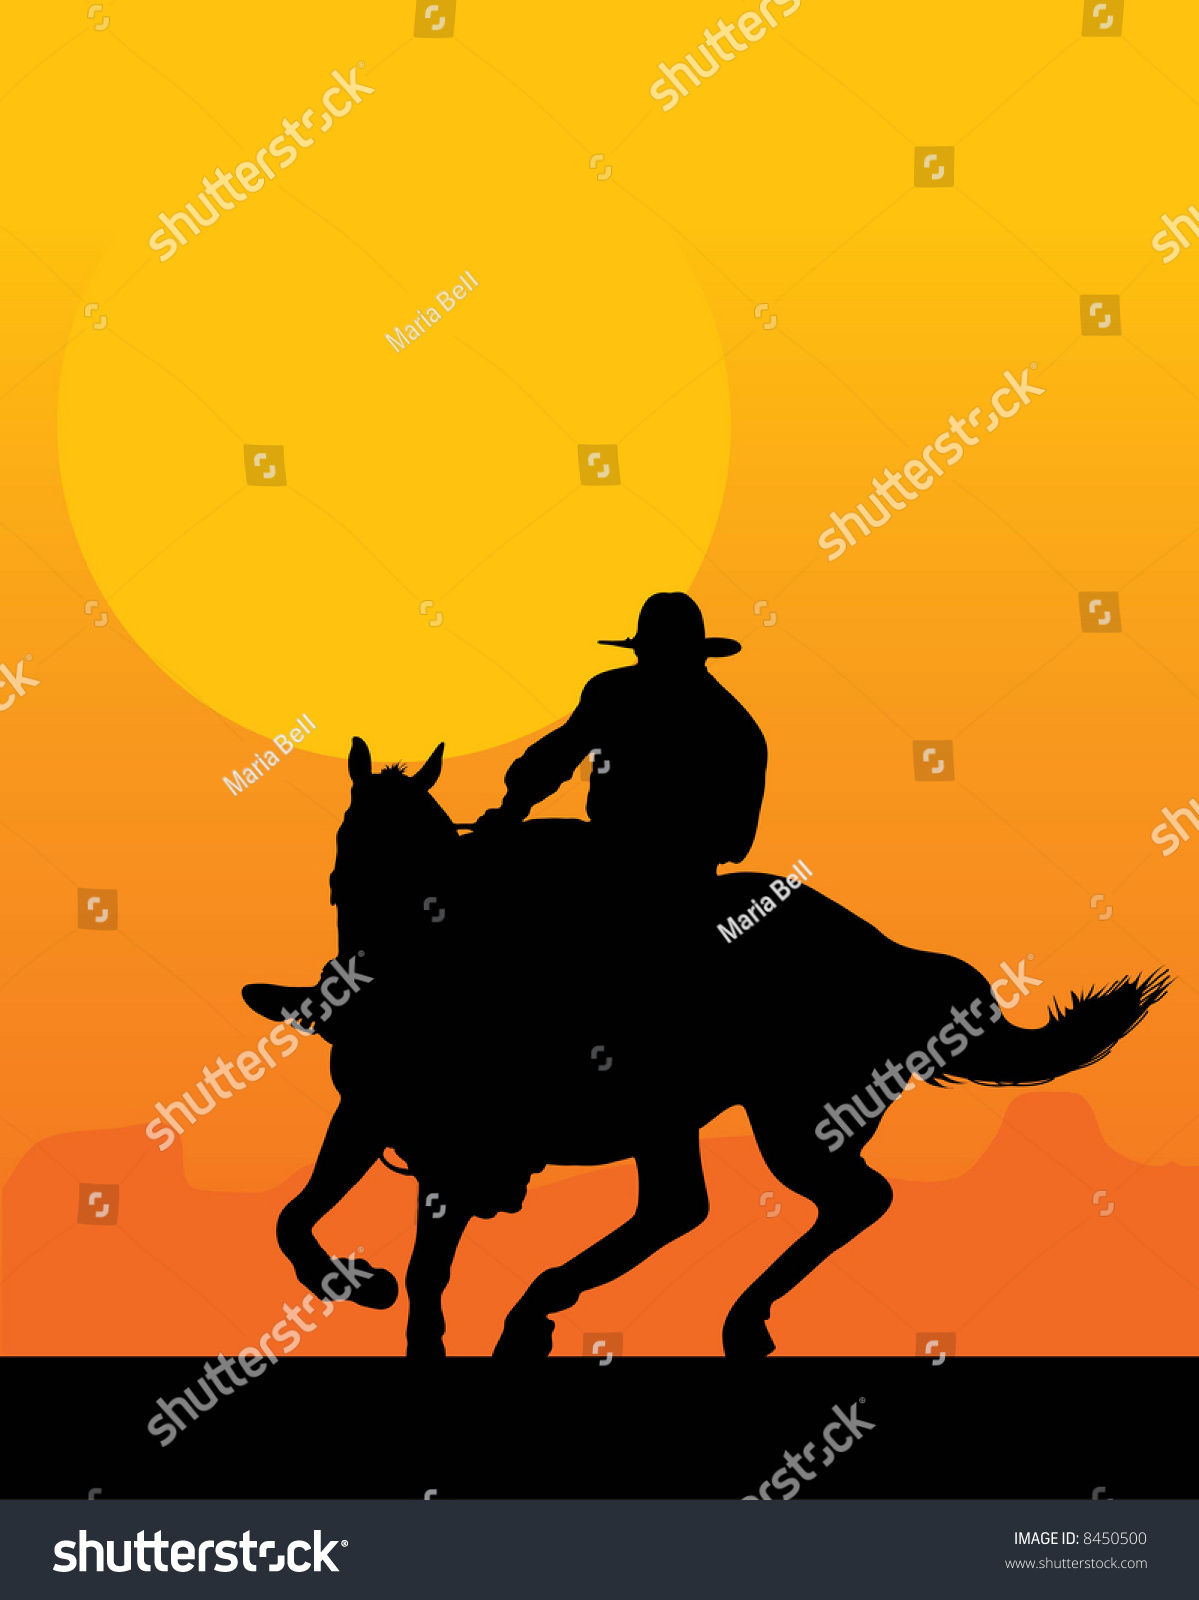 Silhouette Lone Rider Against Sunset Background Stock Vector (Royalty ...